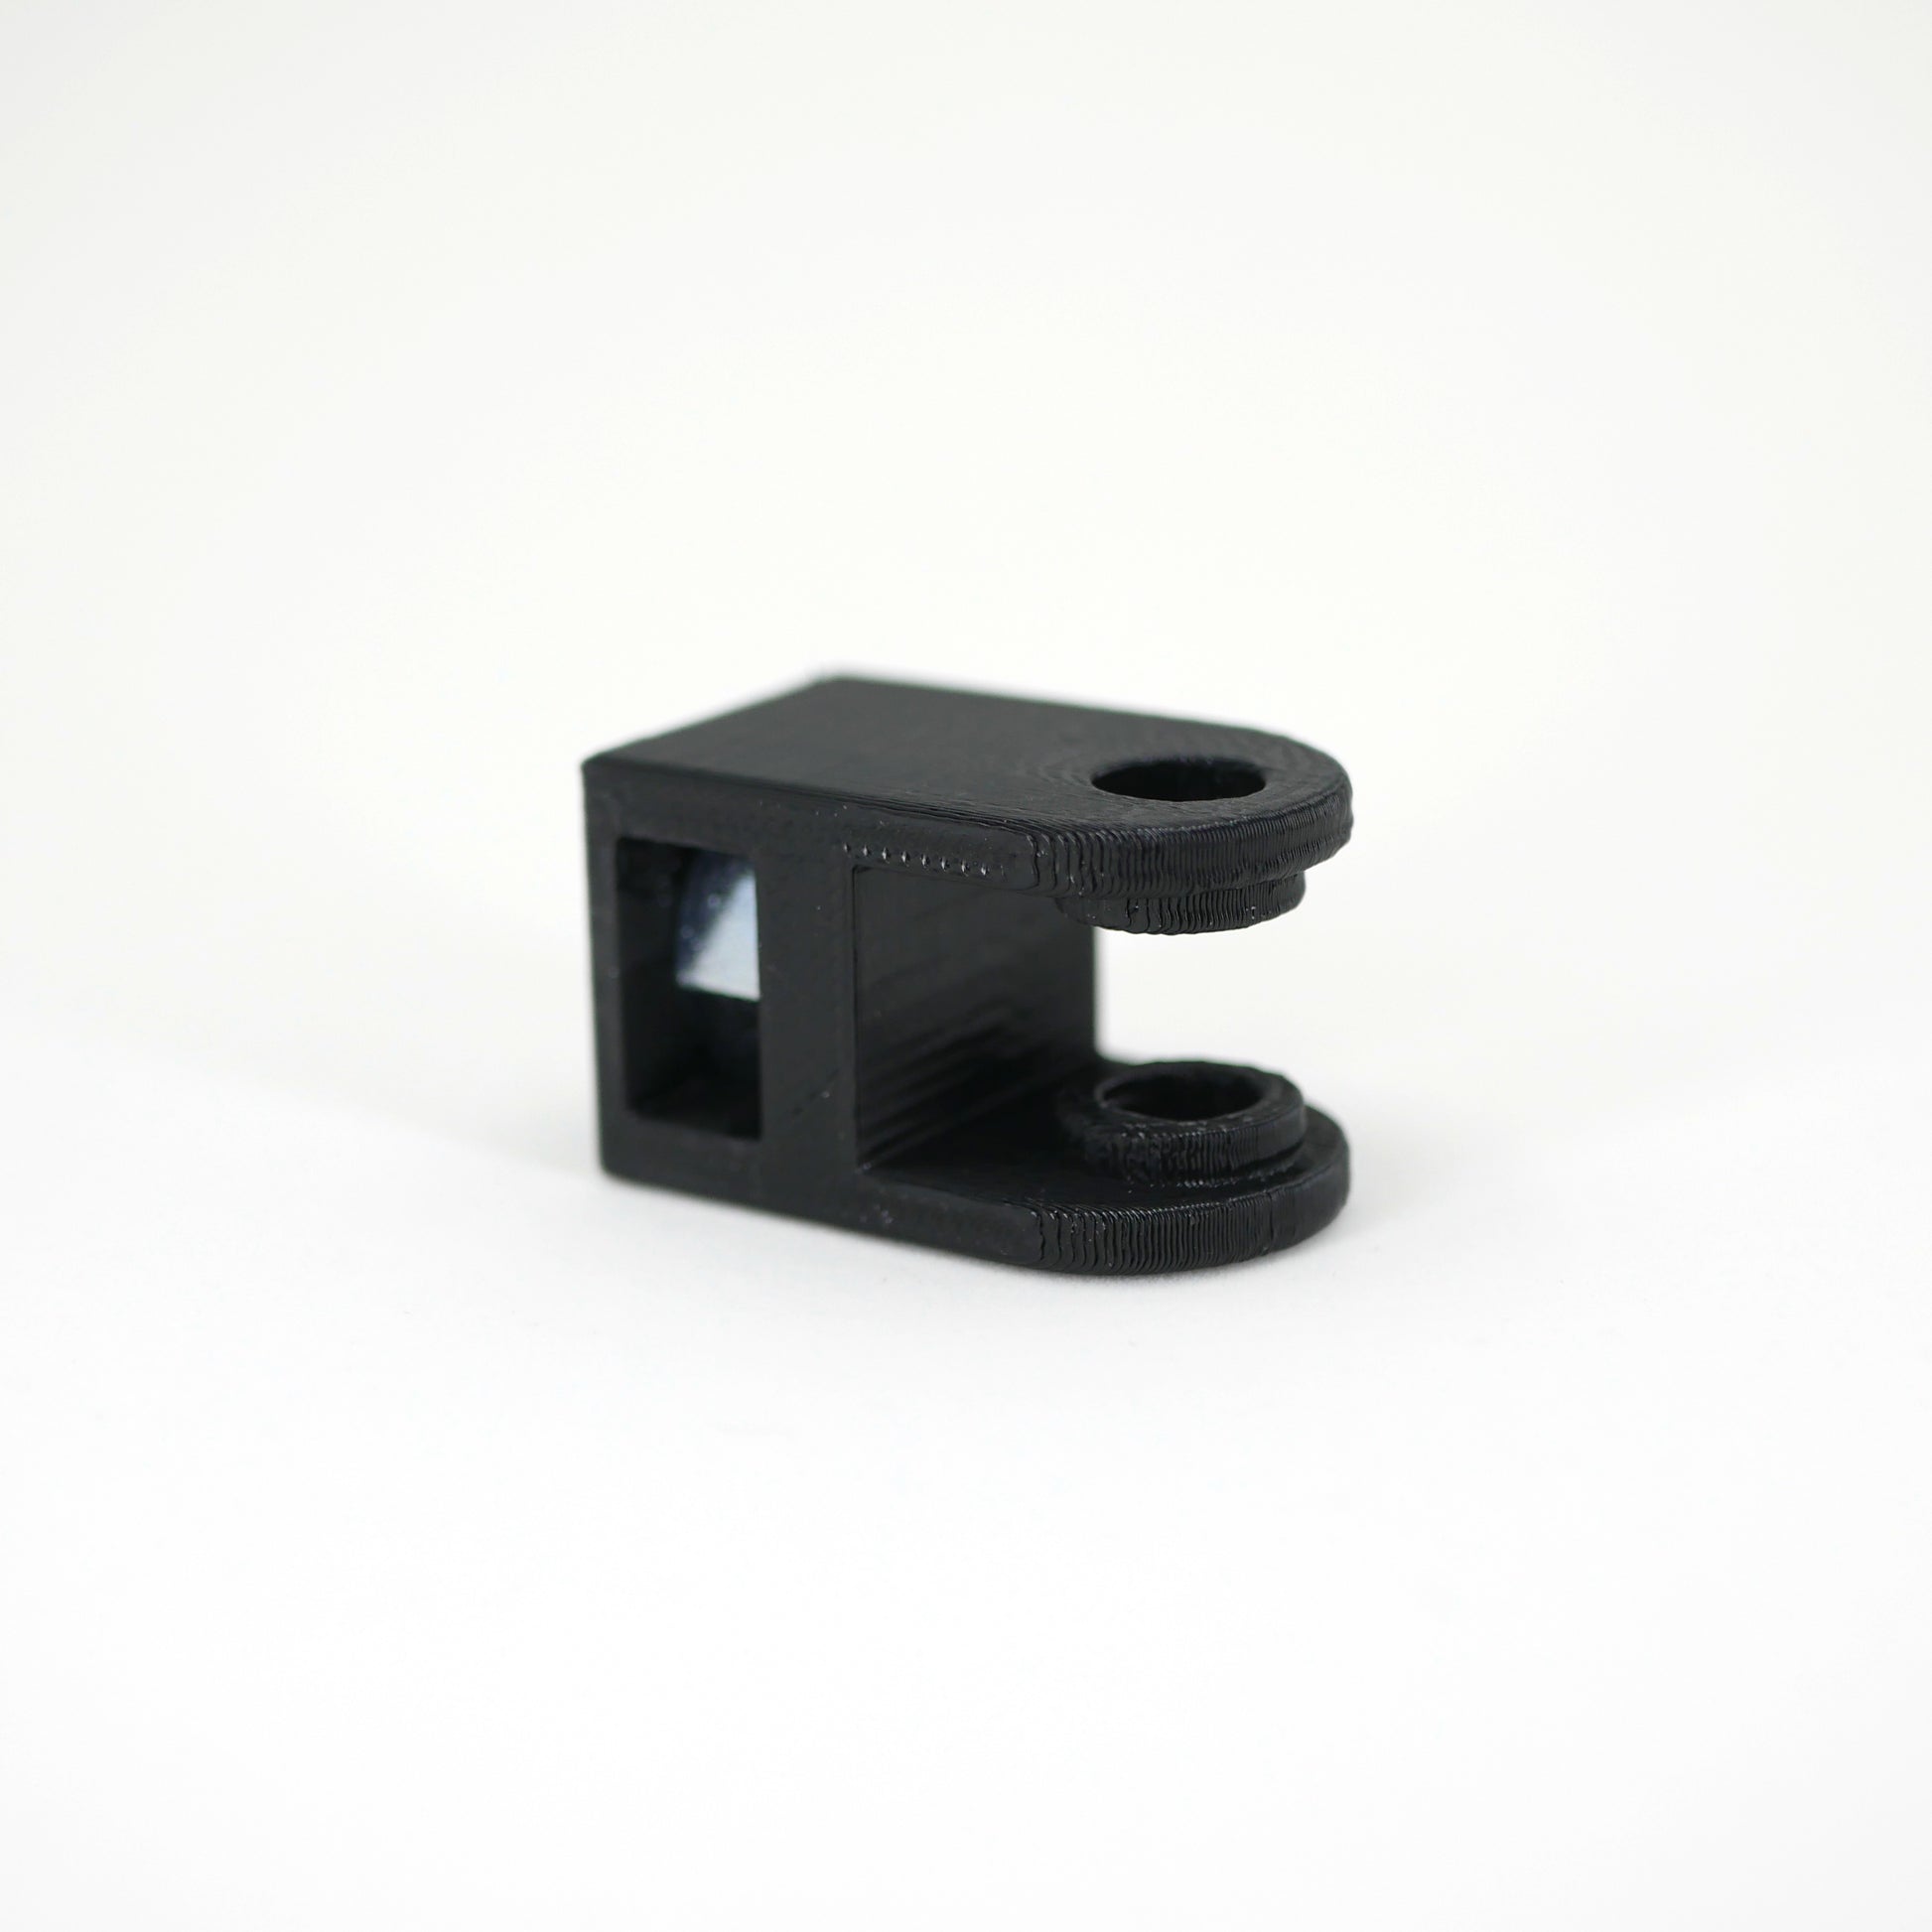 The front of a black HyperX QuadCast microphone mount adapter.